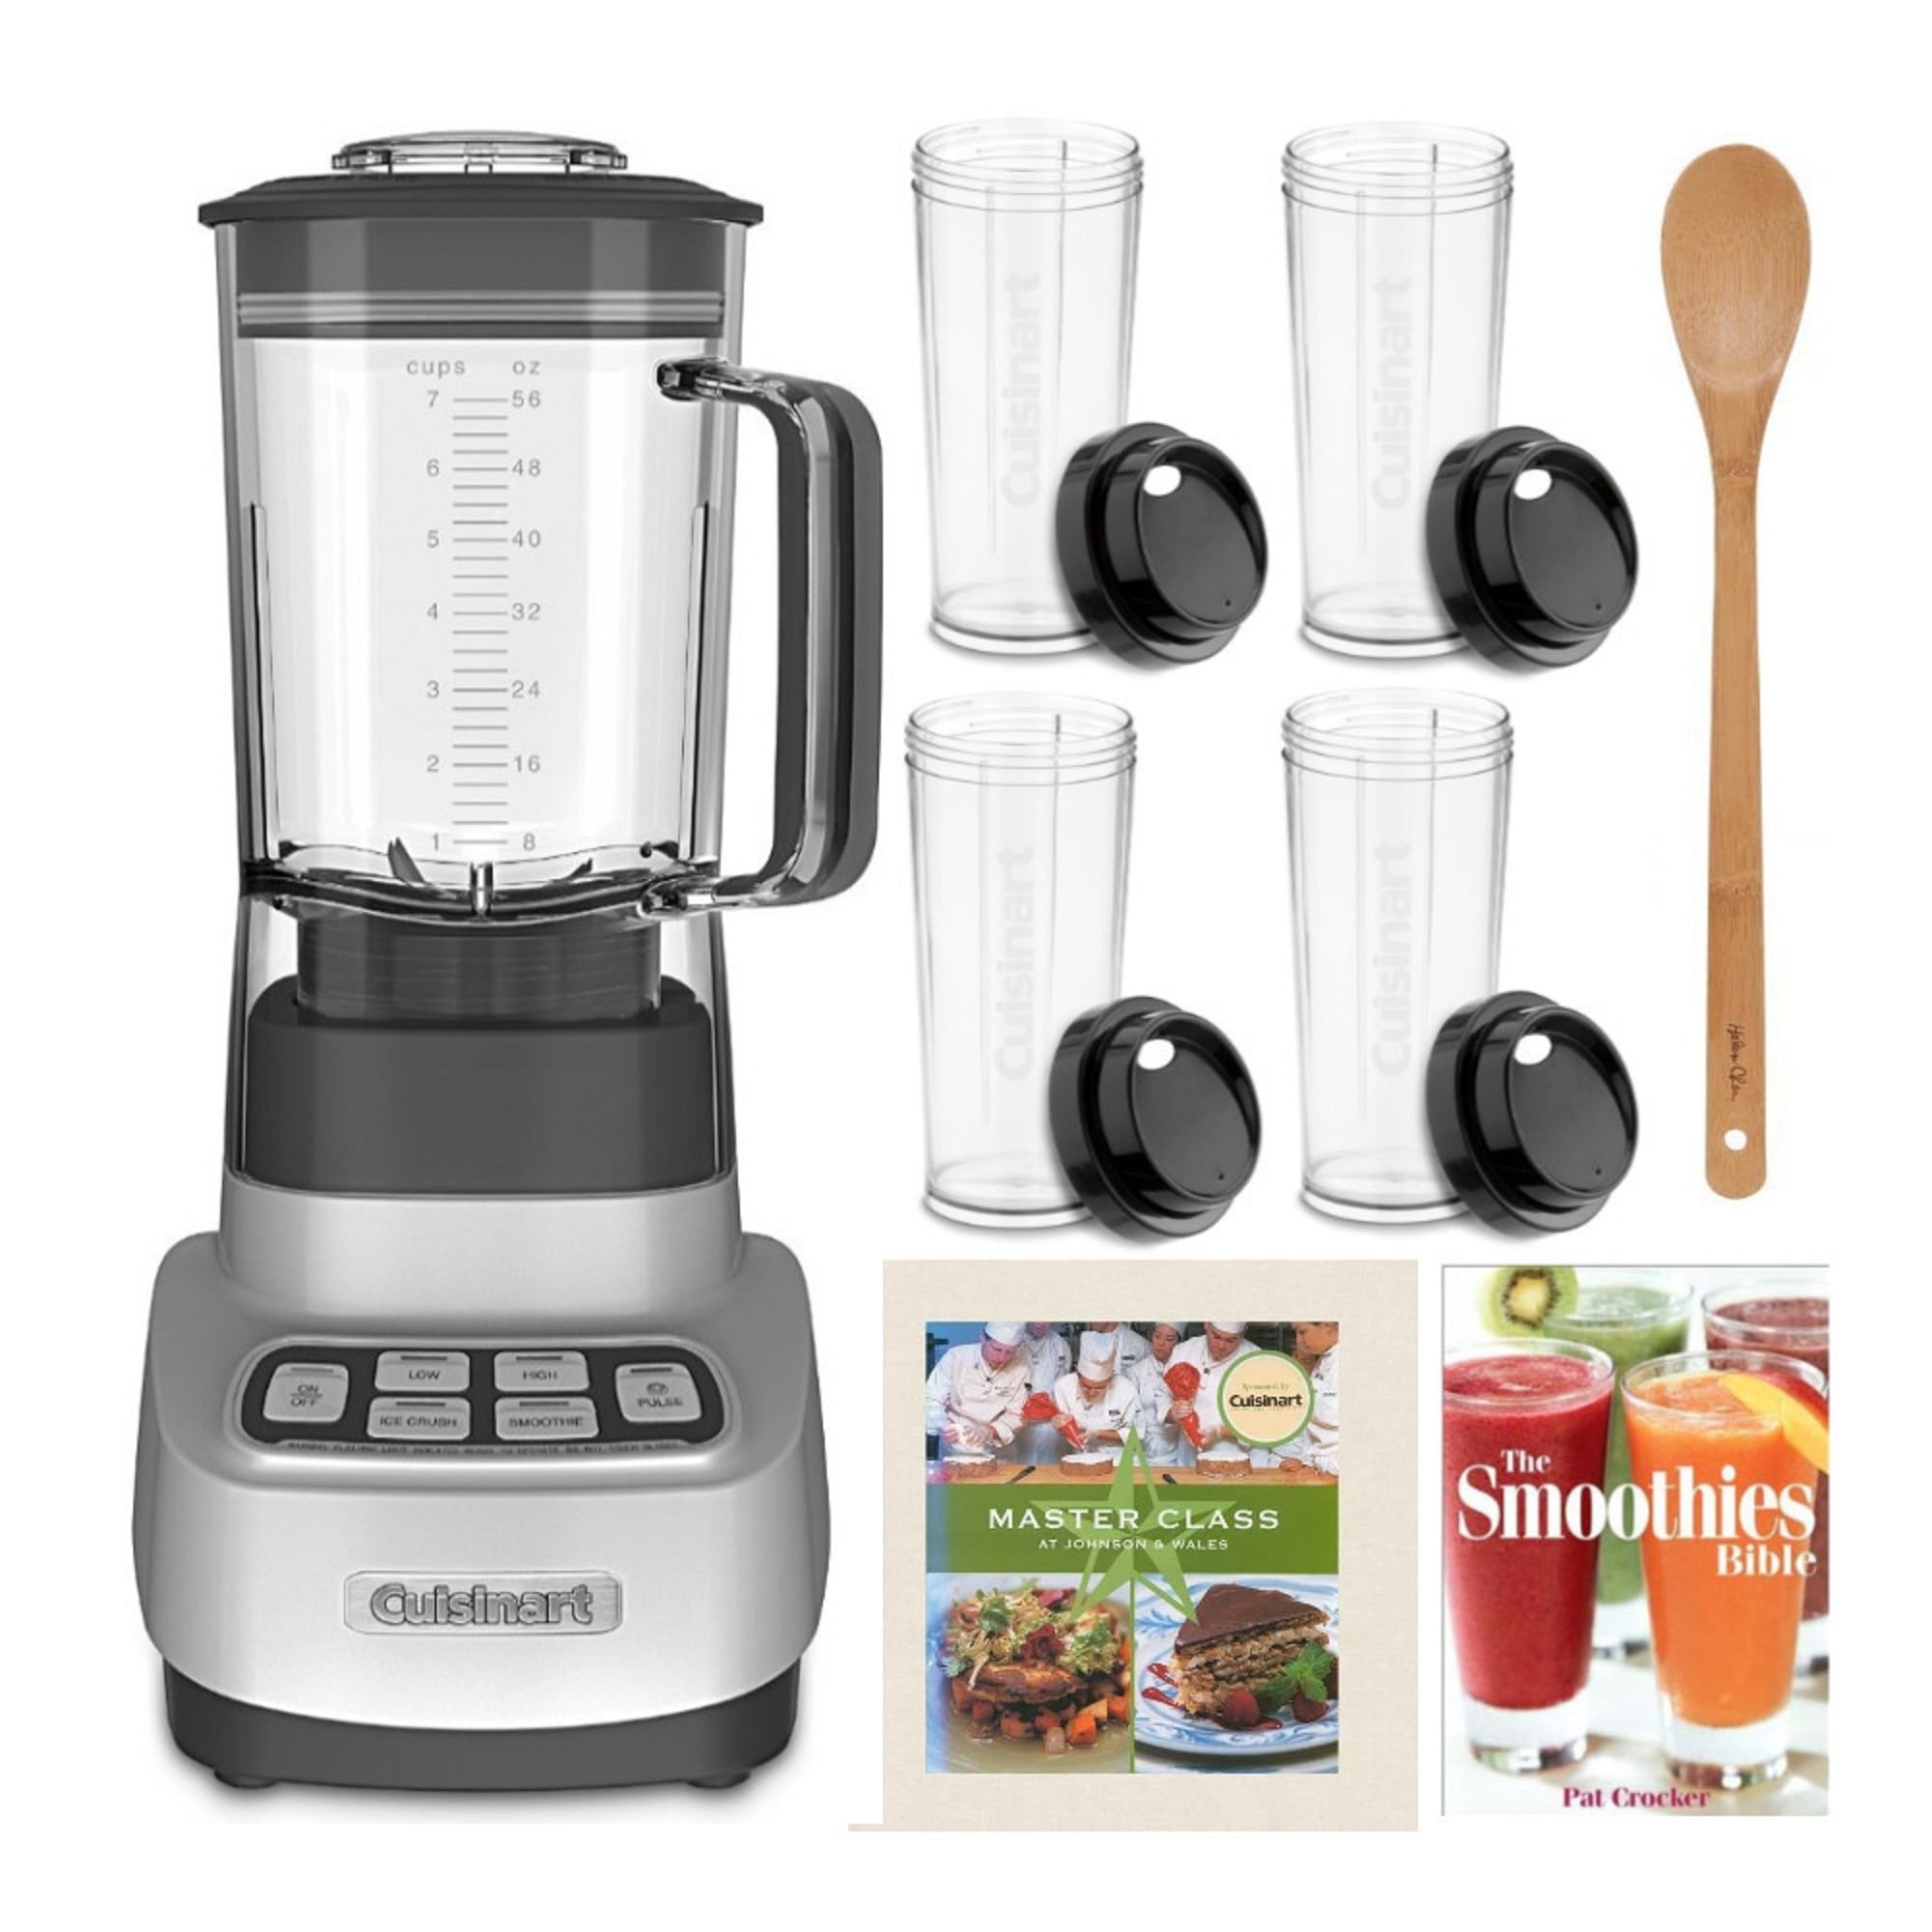 https://ak1.ostkcdn.com/images/products/is/images/direct/6d0bc401b16494c5027f3eccd50cc3c428781ca1/Cuisinart-Velocity-Ultra-7.5-1-HP-Blender-with-Cups-%26-Cookbooks-Bundle.jpg